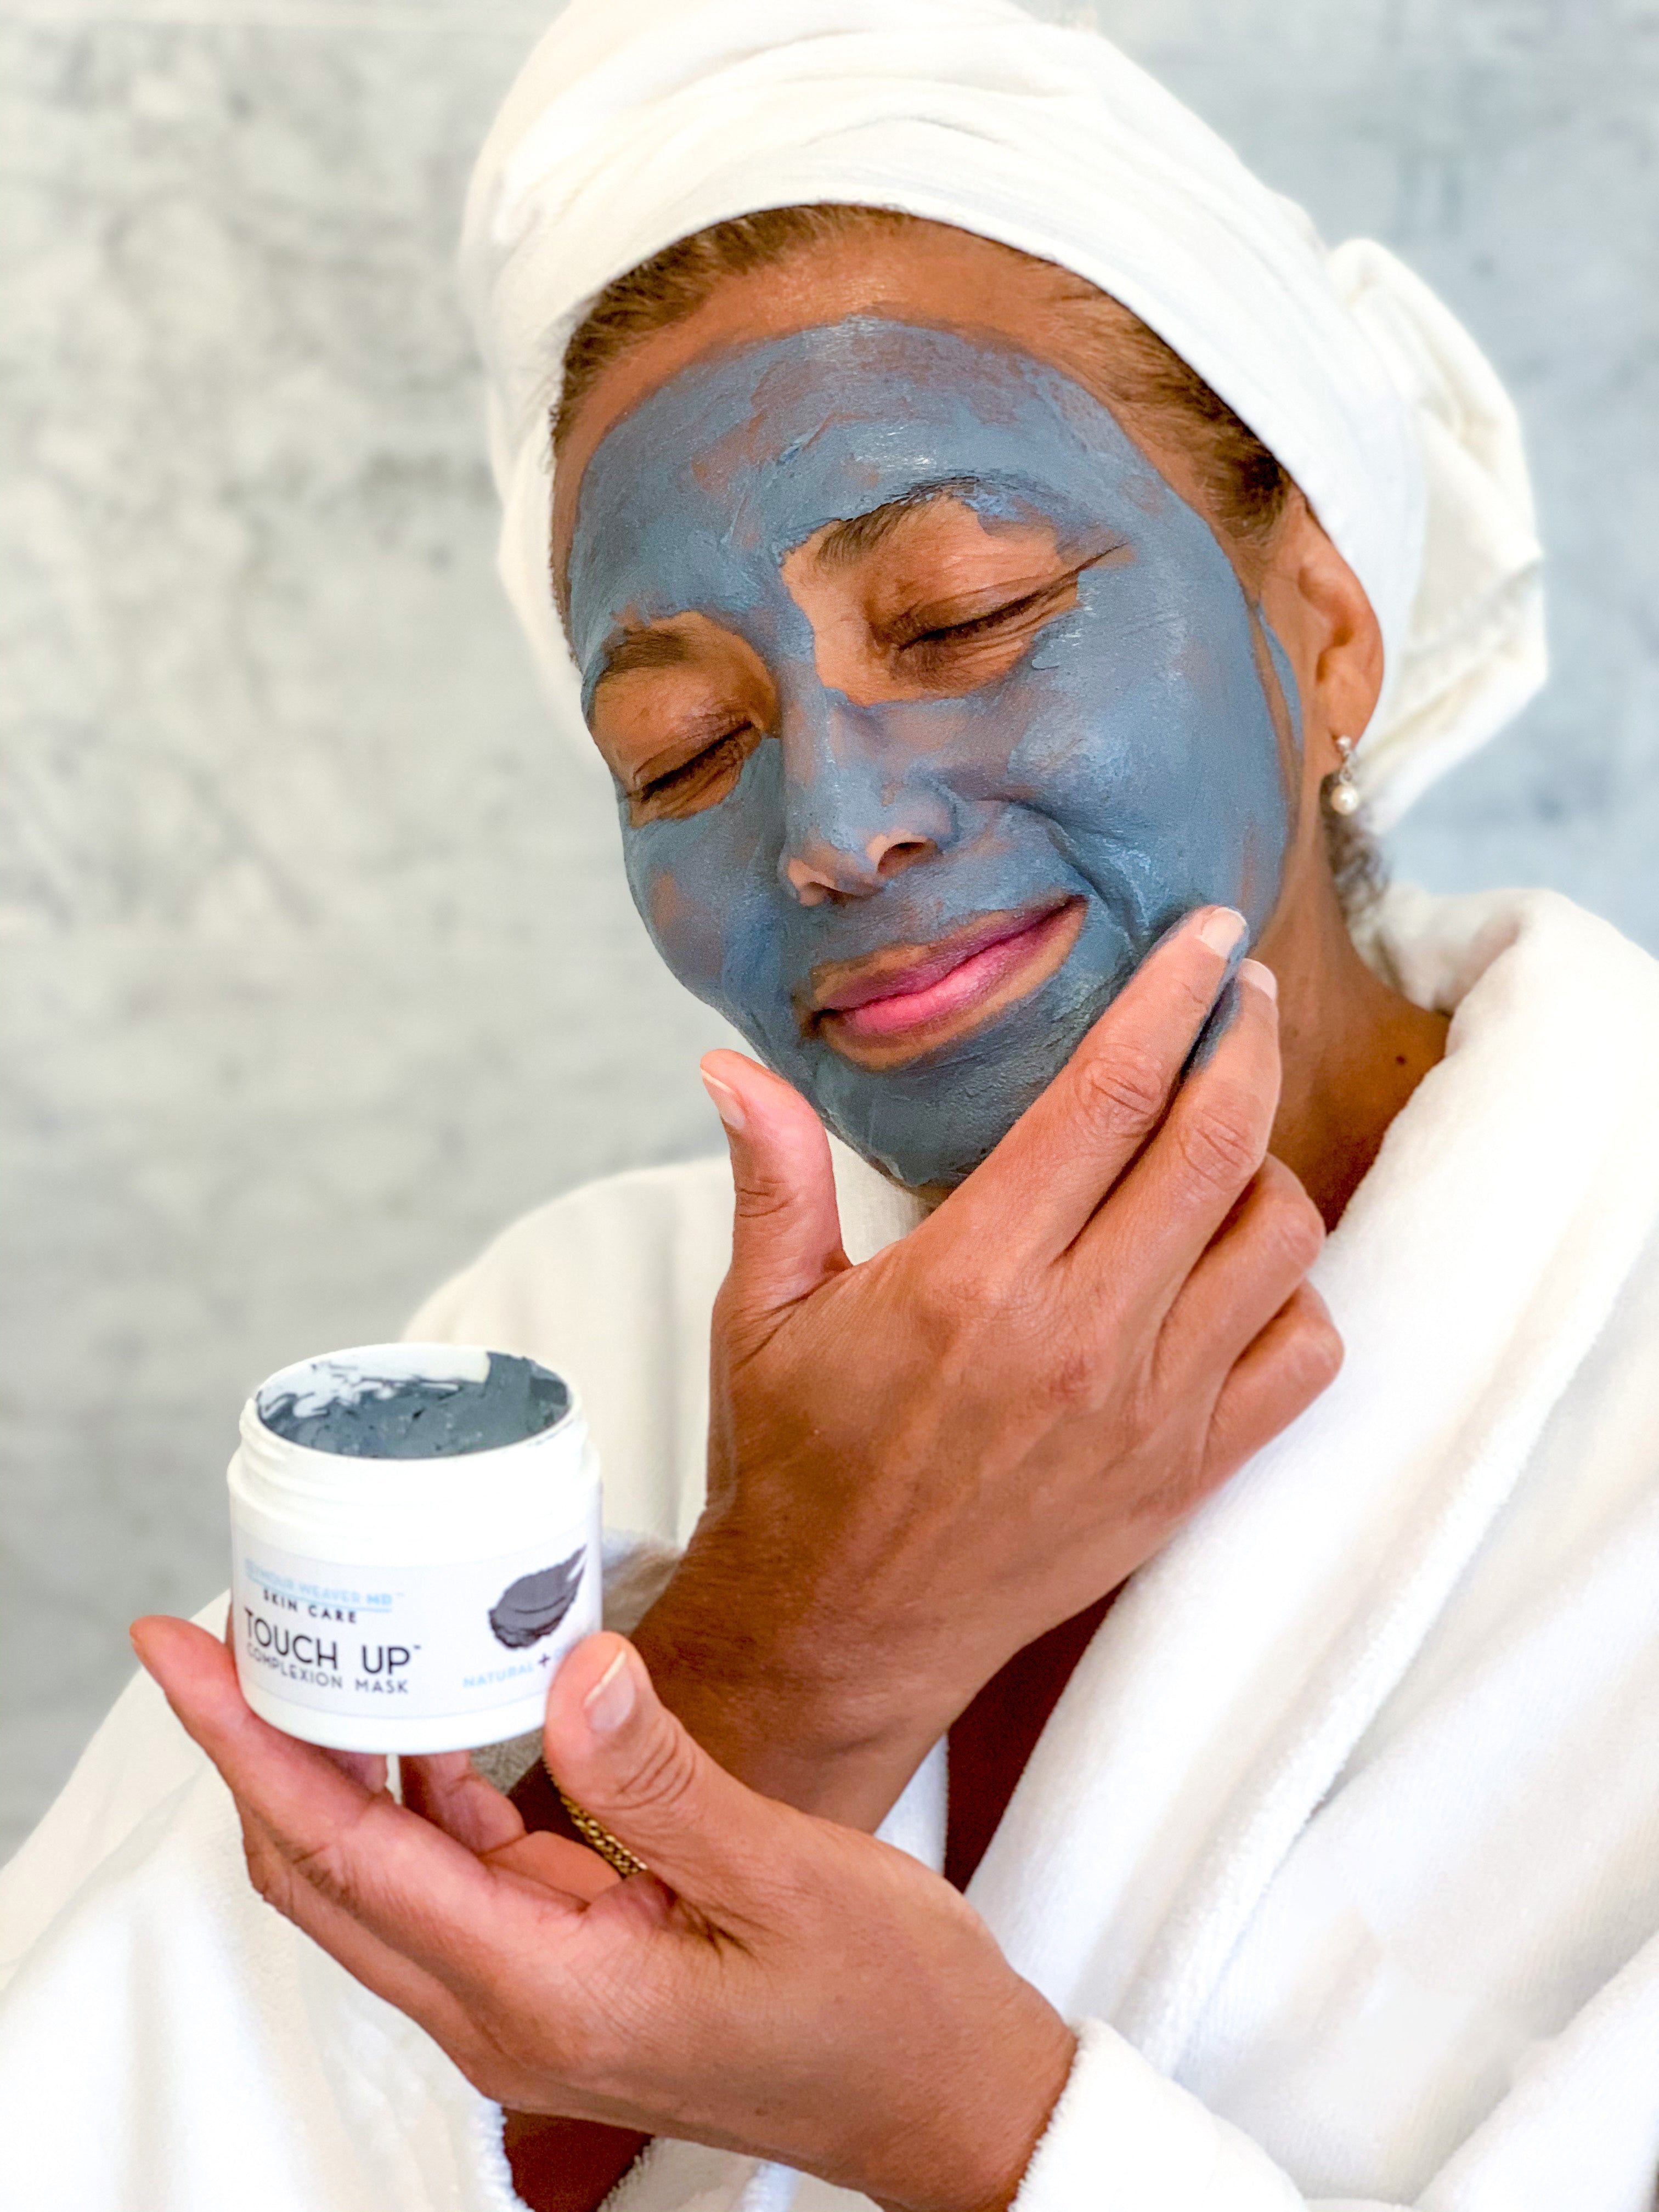 Seymour Weaver TOUCH UP Complexion Mask 6